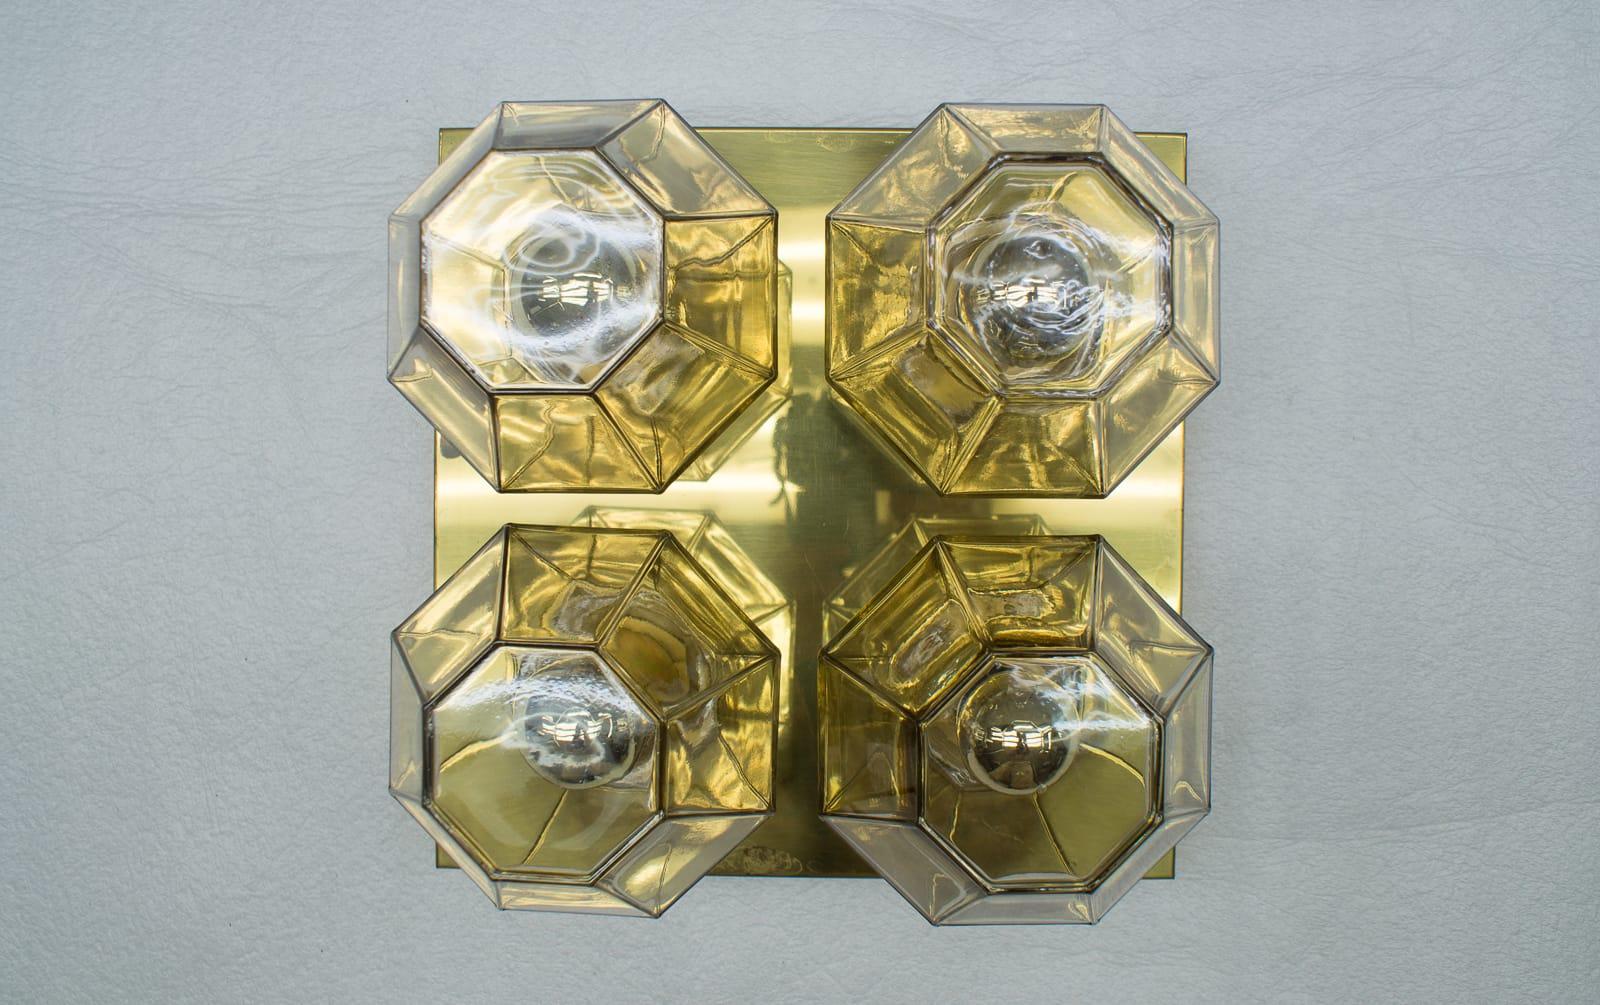 Geometric 4-Light Limburg Brass and Glass Wall or Ceiling Lamp, Germany, 1960s For Sale 5